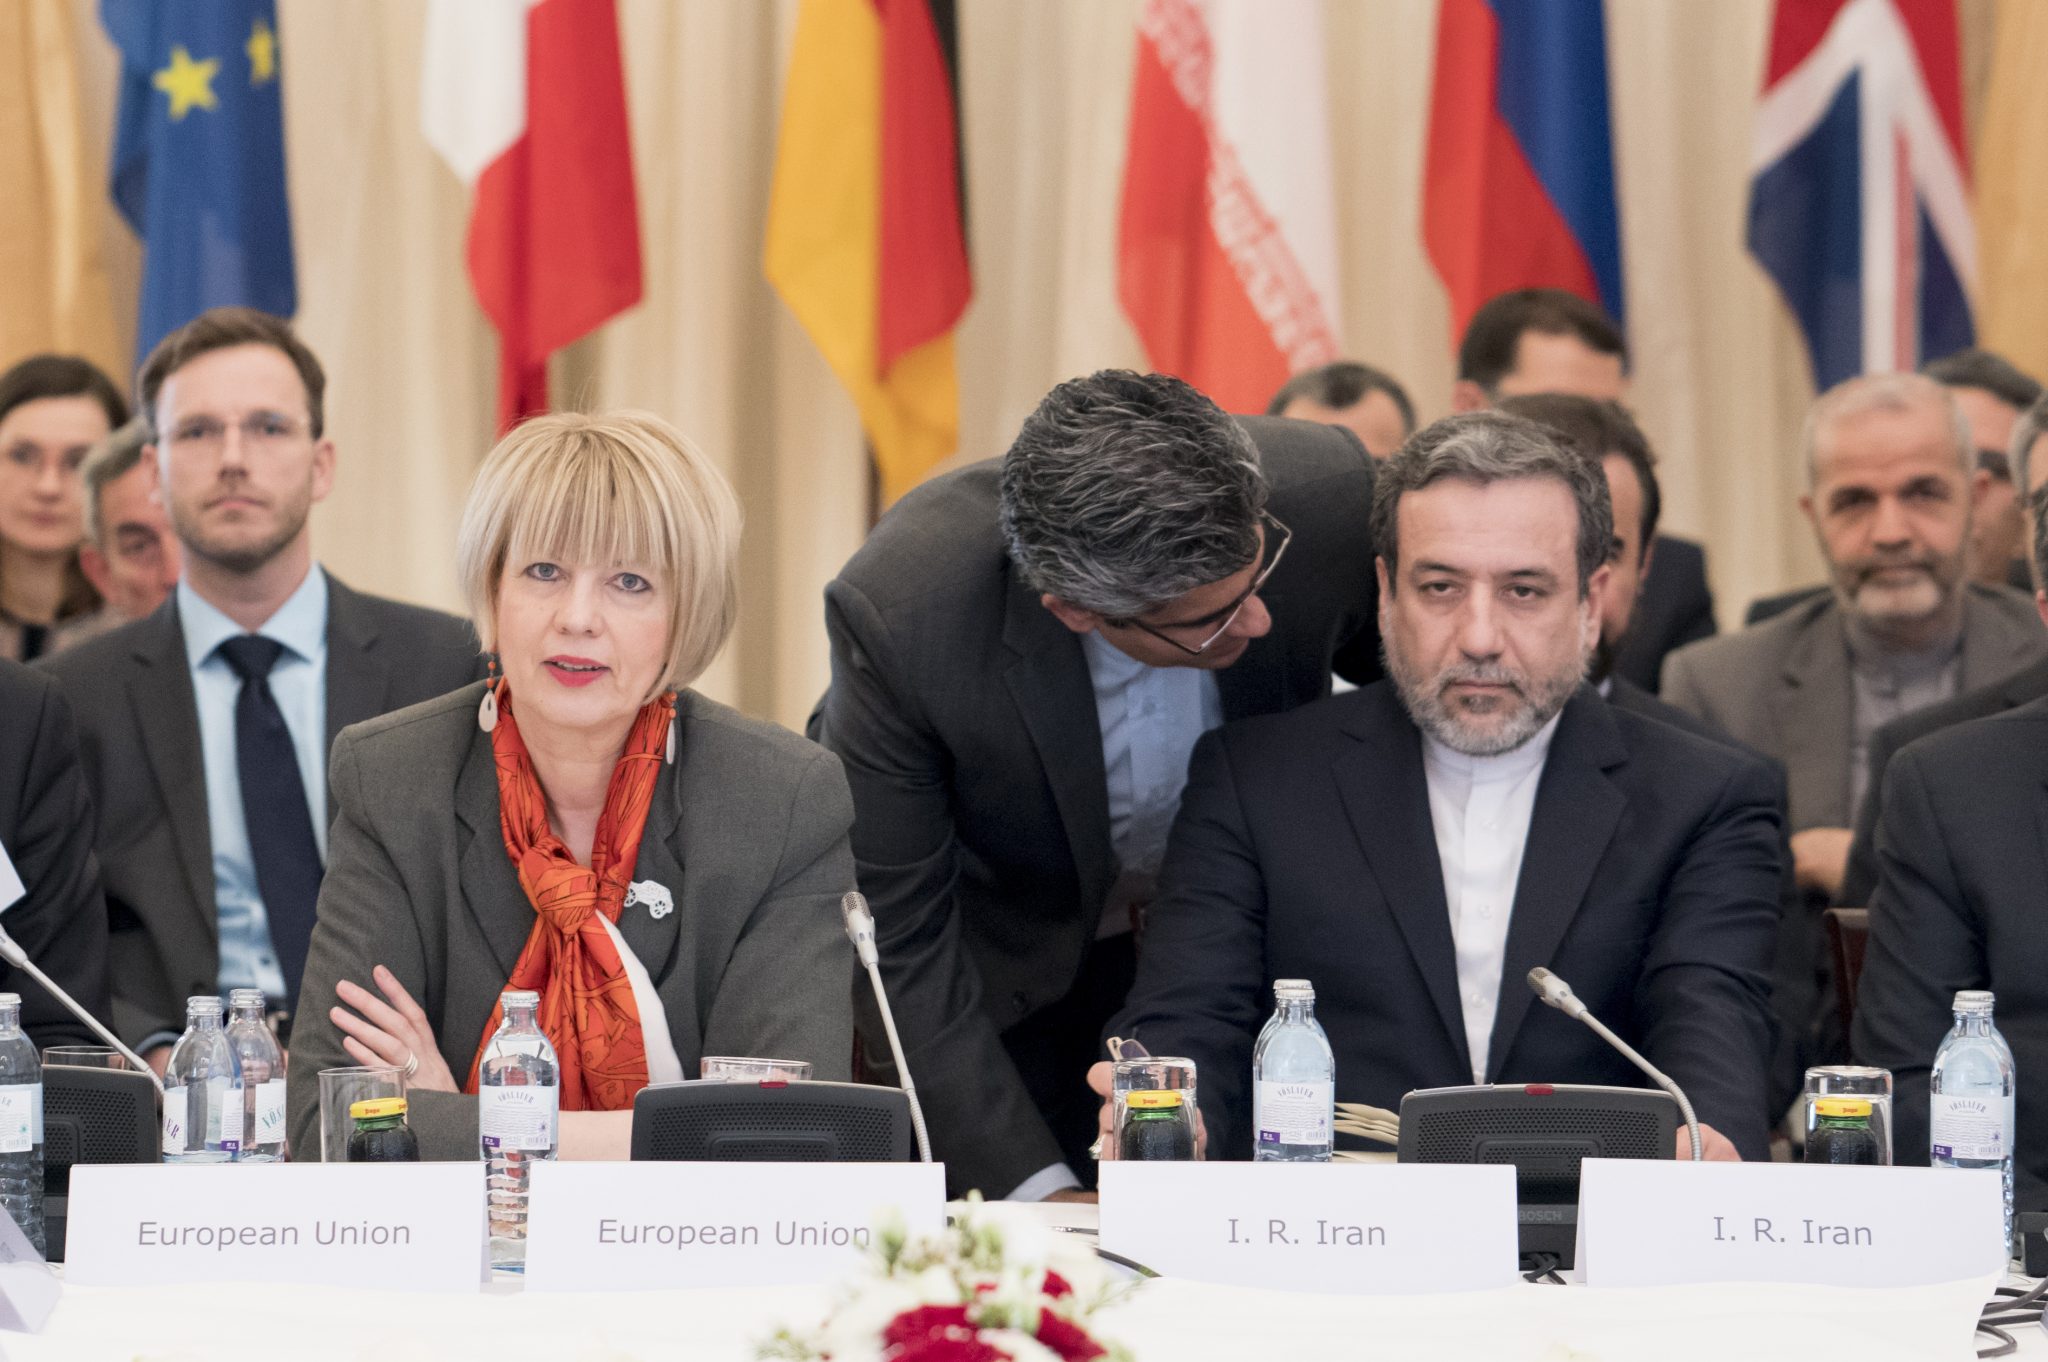 EU senior diplomat Helga Schmid (L), Iranian deputy foreign minister Abbas Araghchi (R) and senior diplomats from other six major powers meet in Vienna, Austria on April 25, 2017 for a regular quarterly meeting to review adherence to their 2015 nuclear deal, as uncertainty grows about the landmark accord's future under US President Trump. Trump said that Iran was 'not living up to the spirit' of the agreement. / AFP PHOTO / JOE KLAMAR